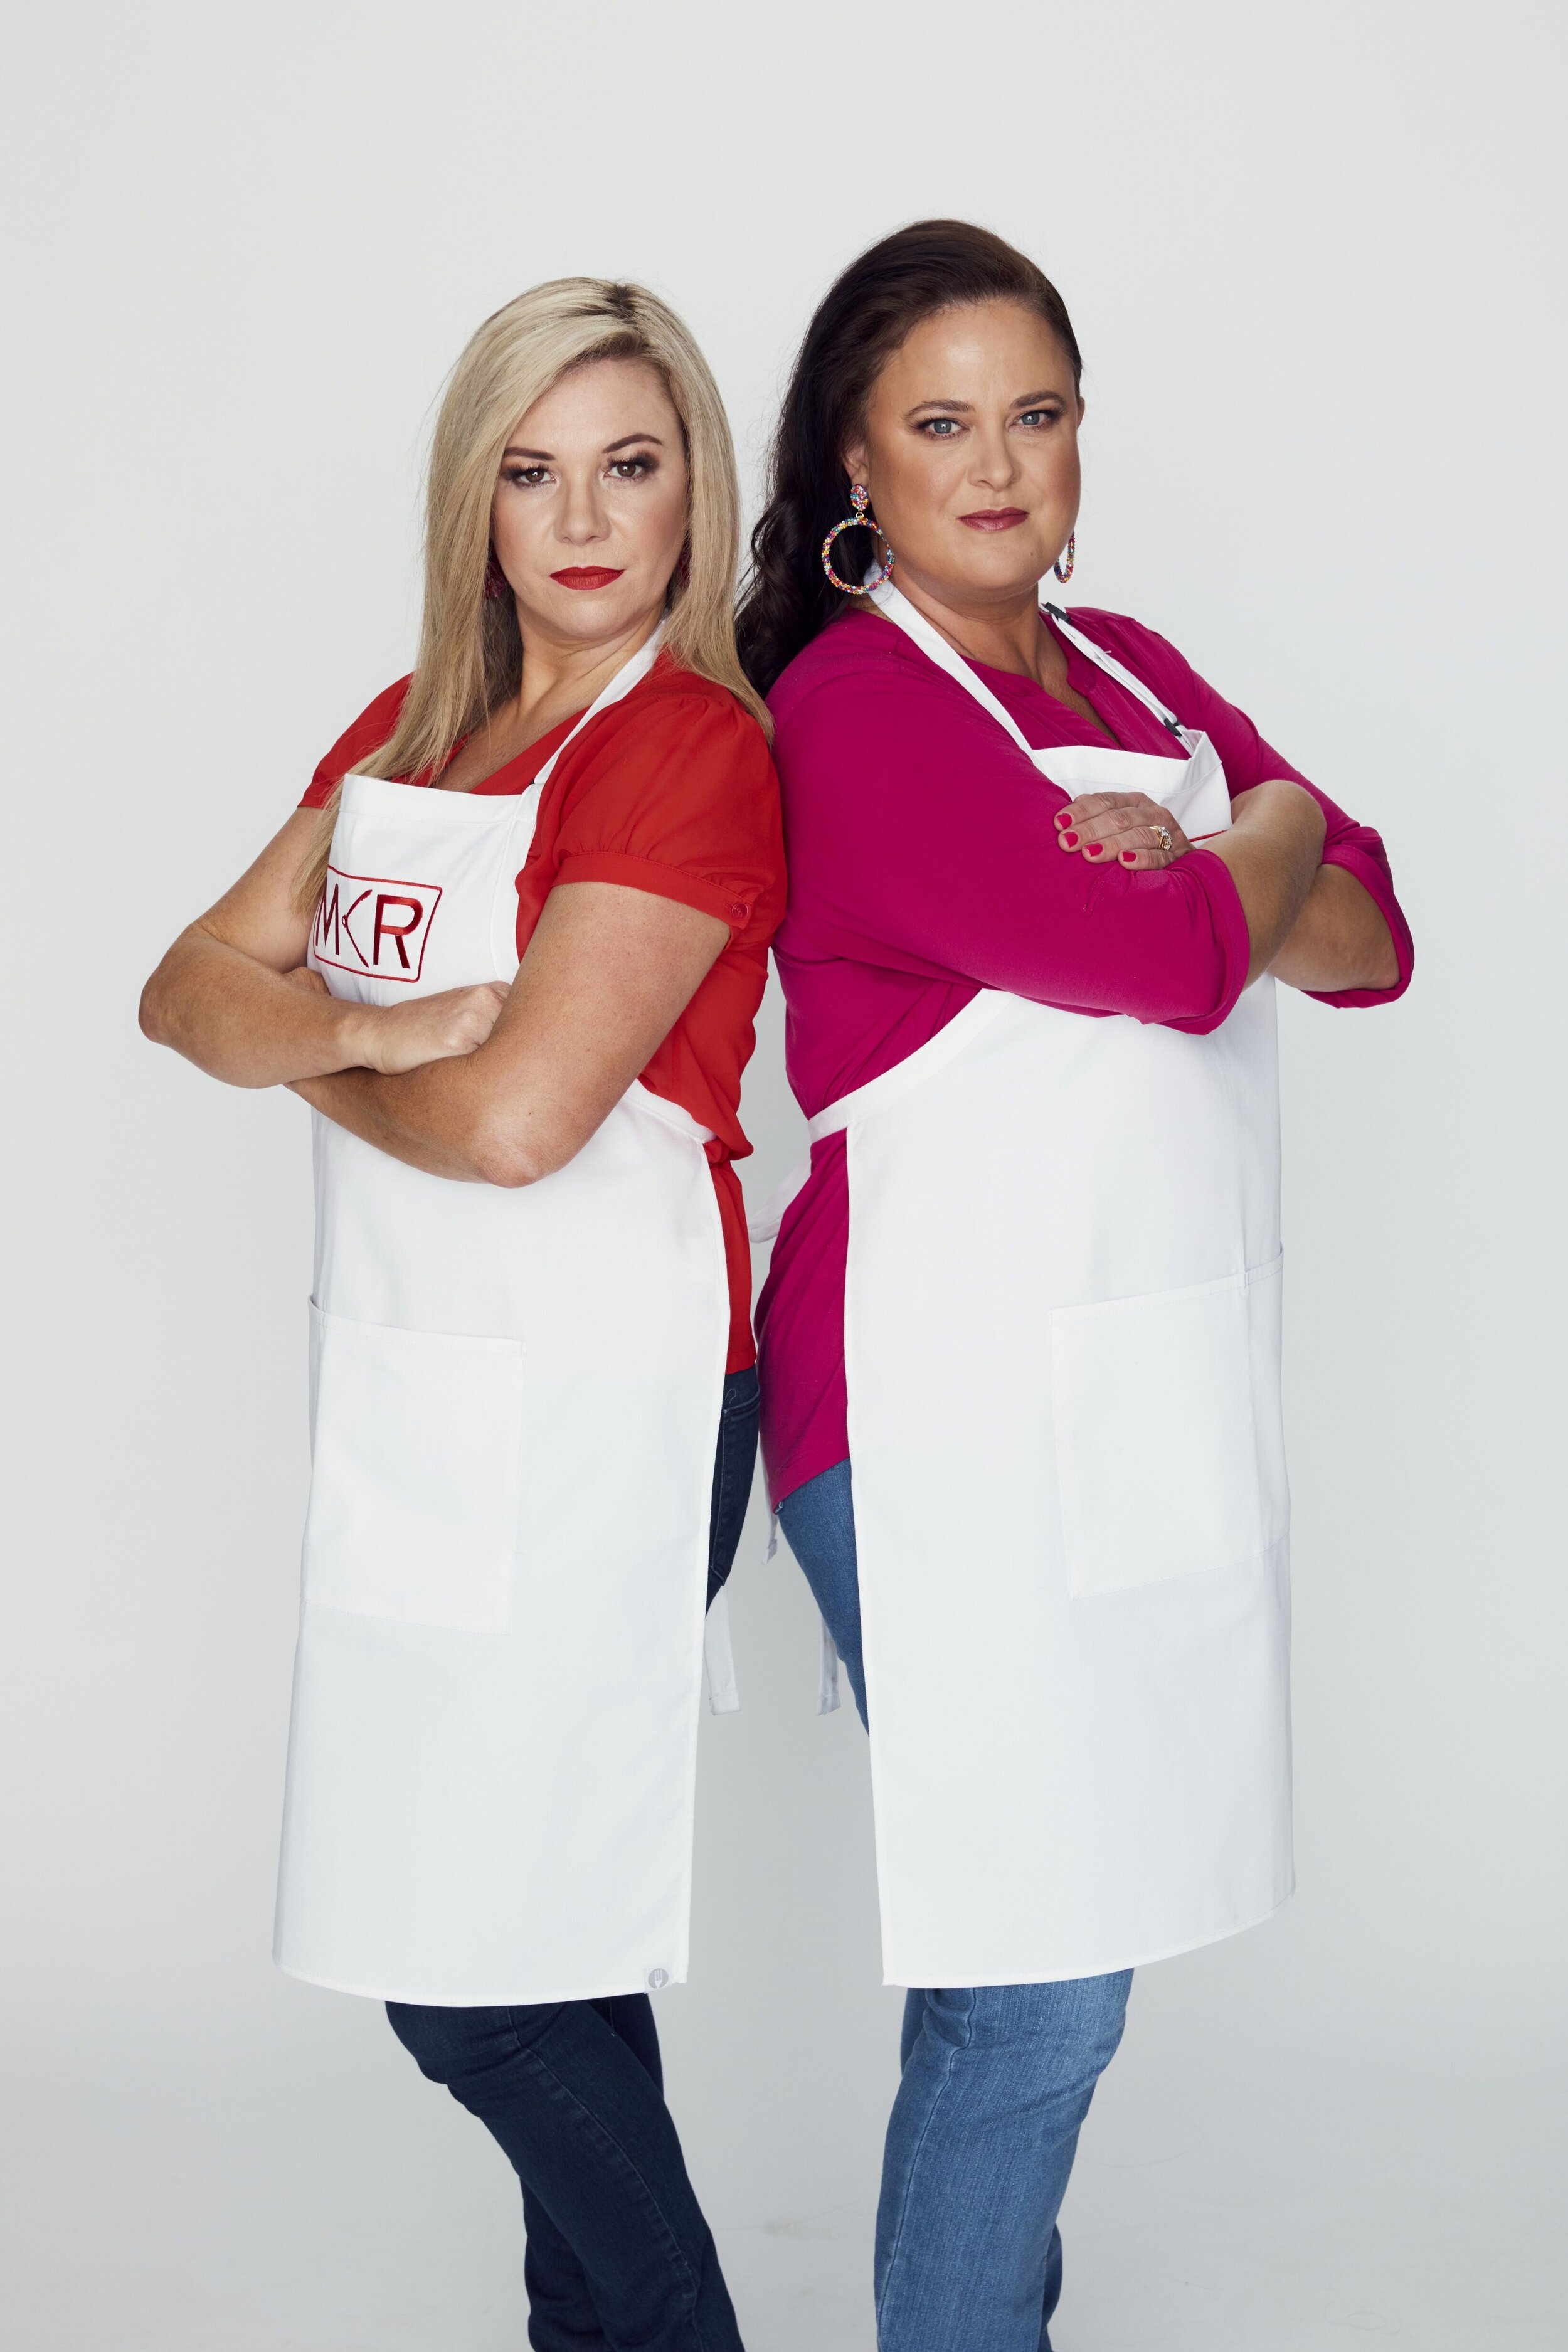   MKR: The Rivals  Source: Seven Network 